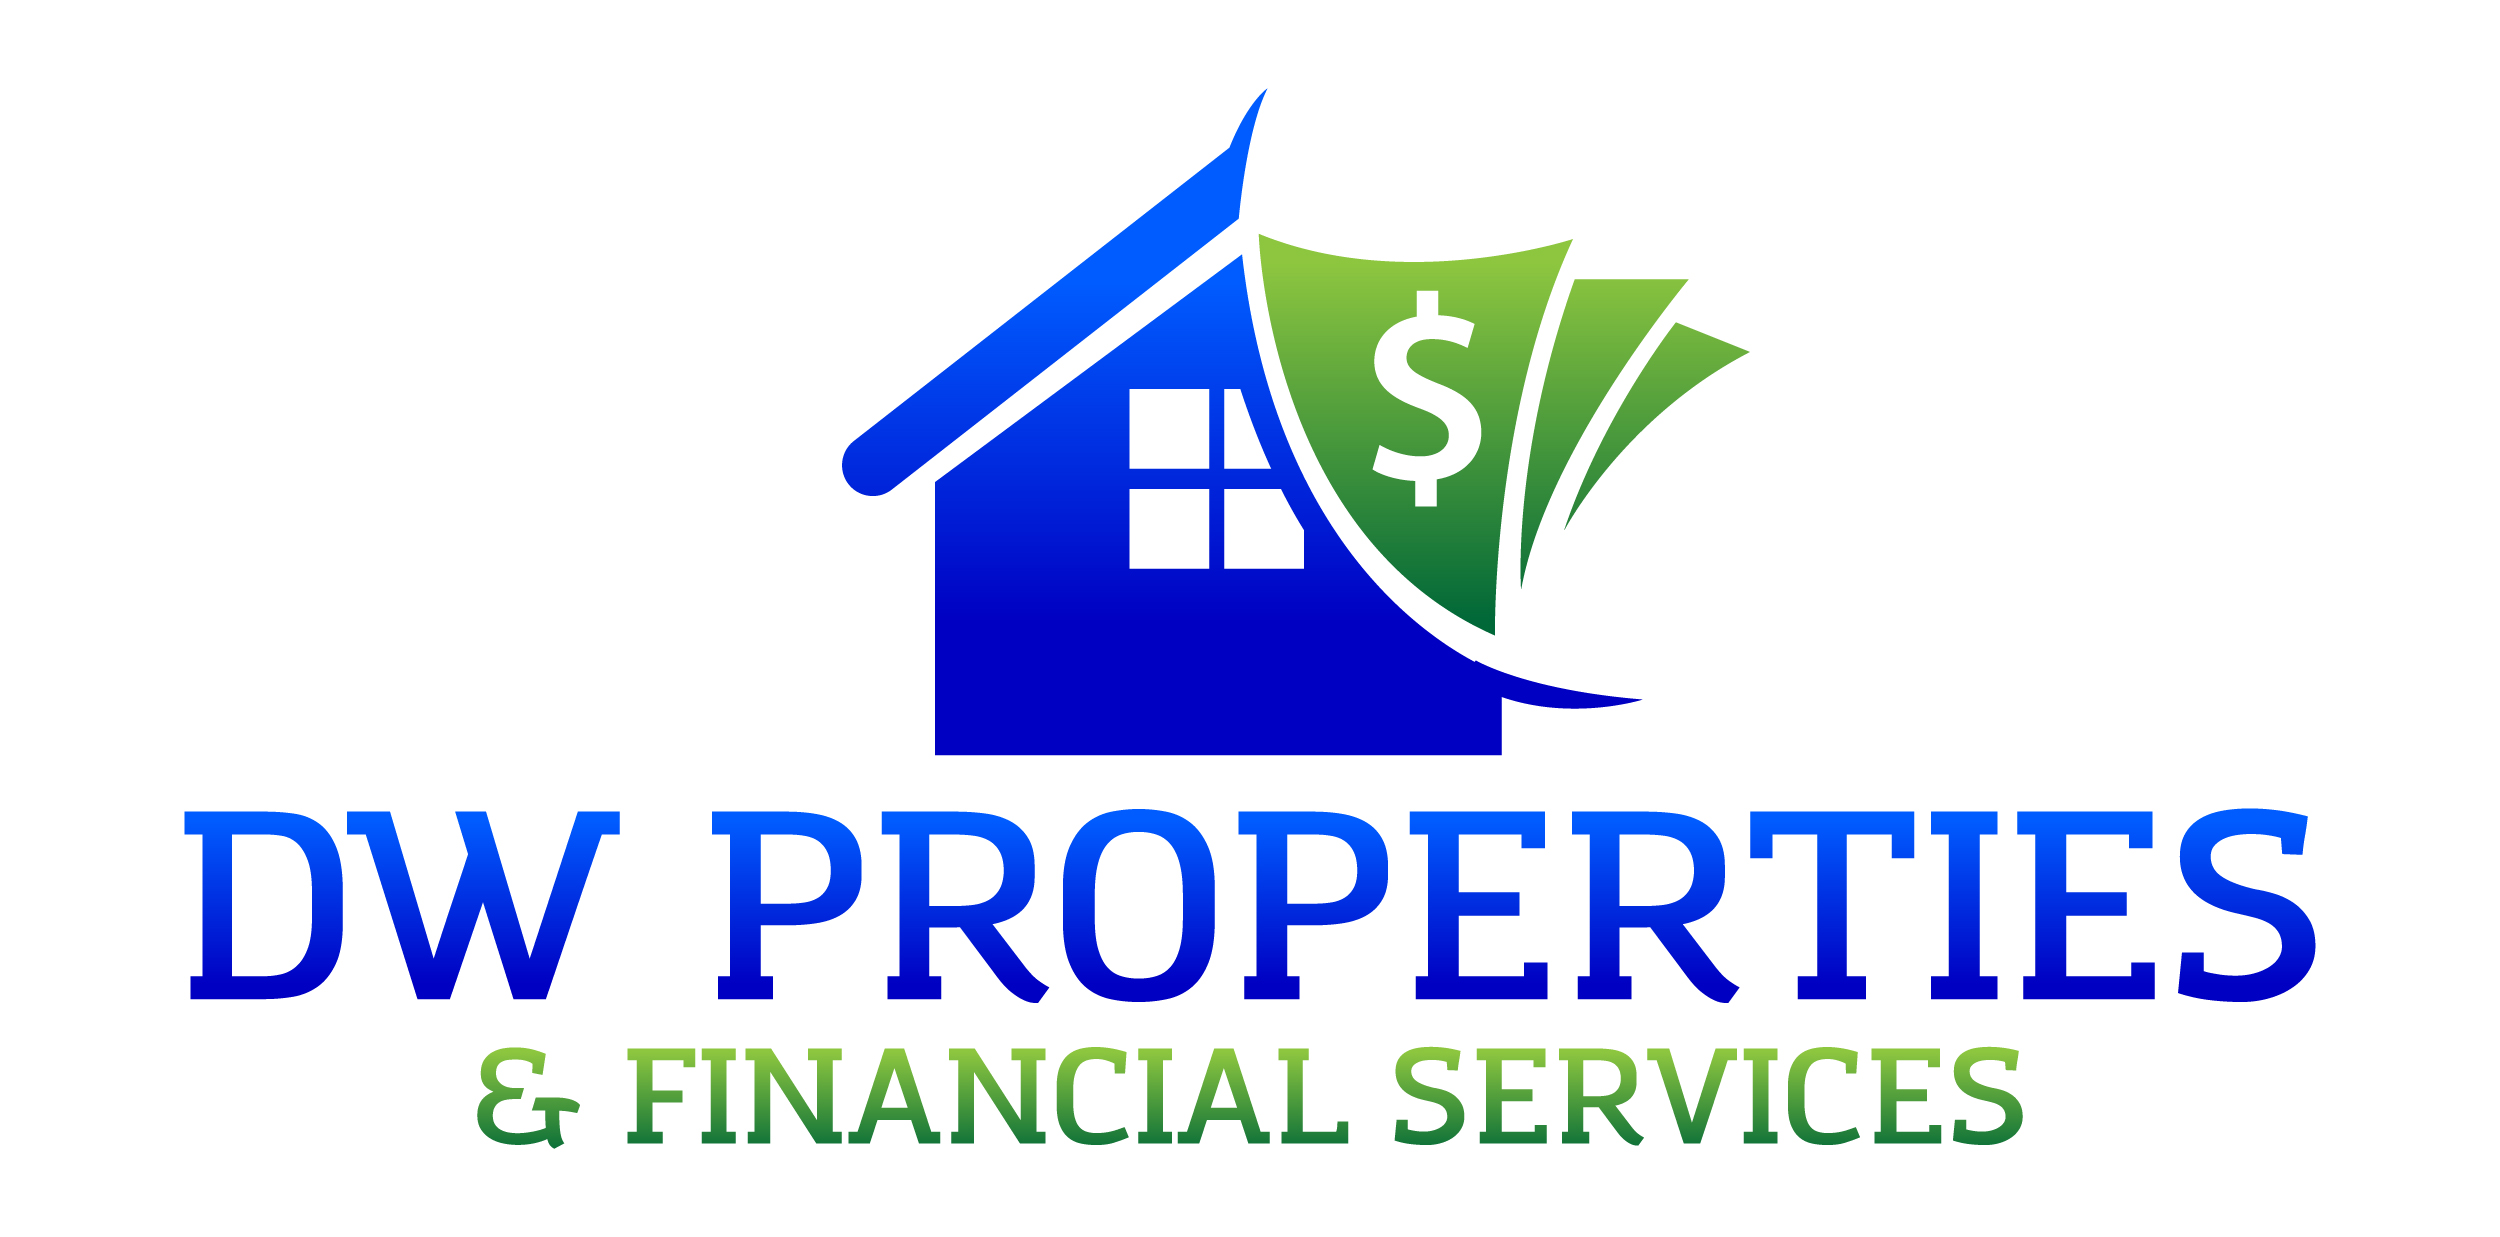 DW Properties & Financial Services